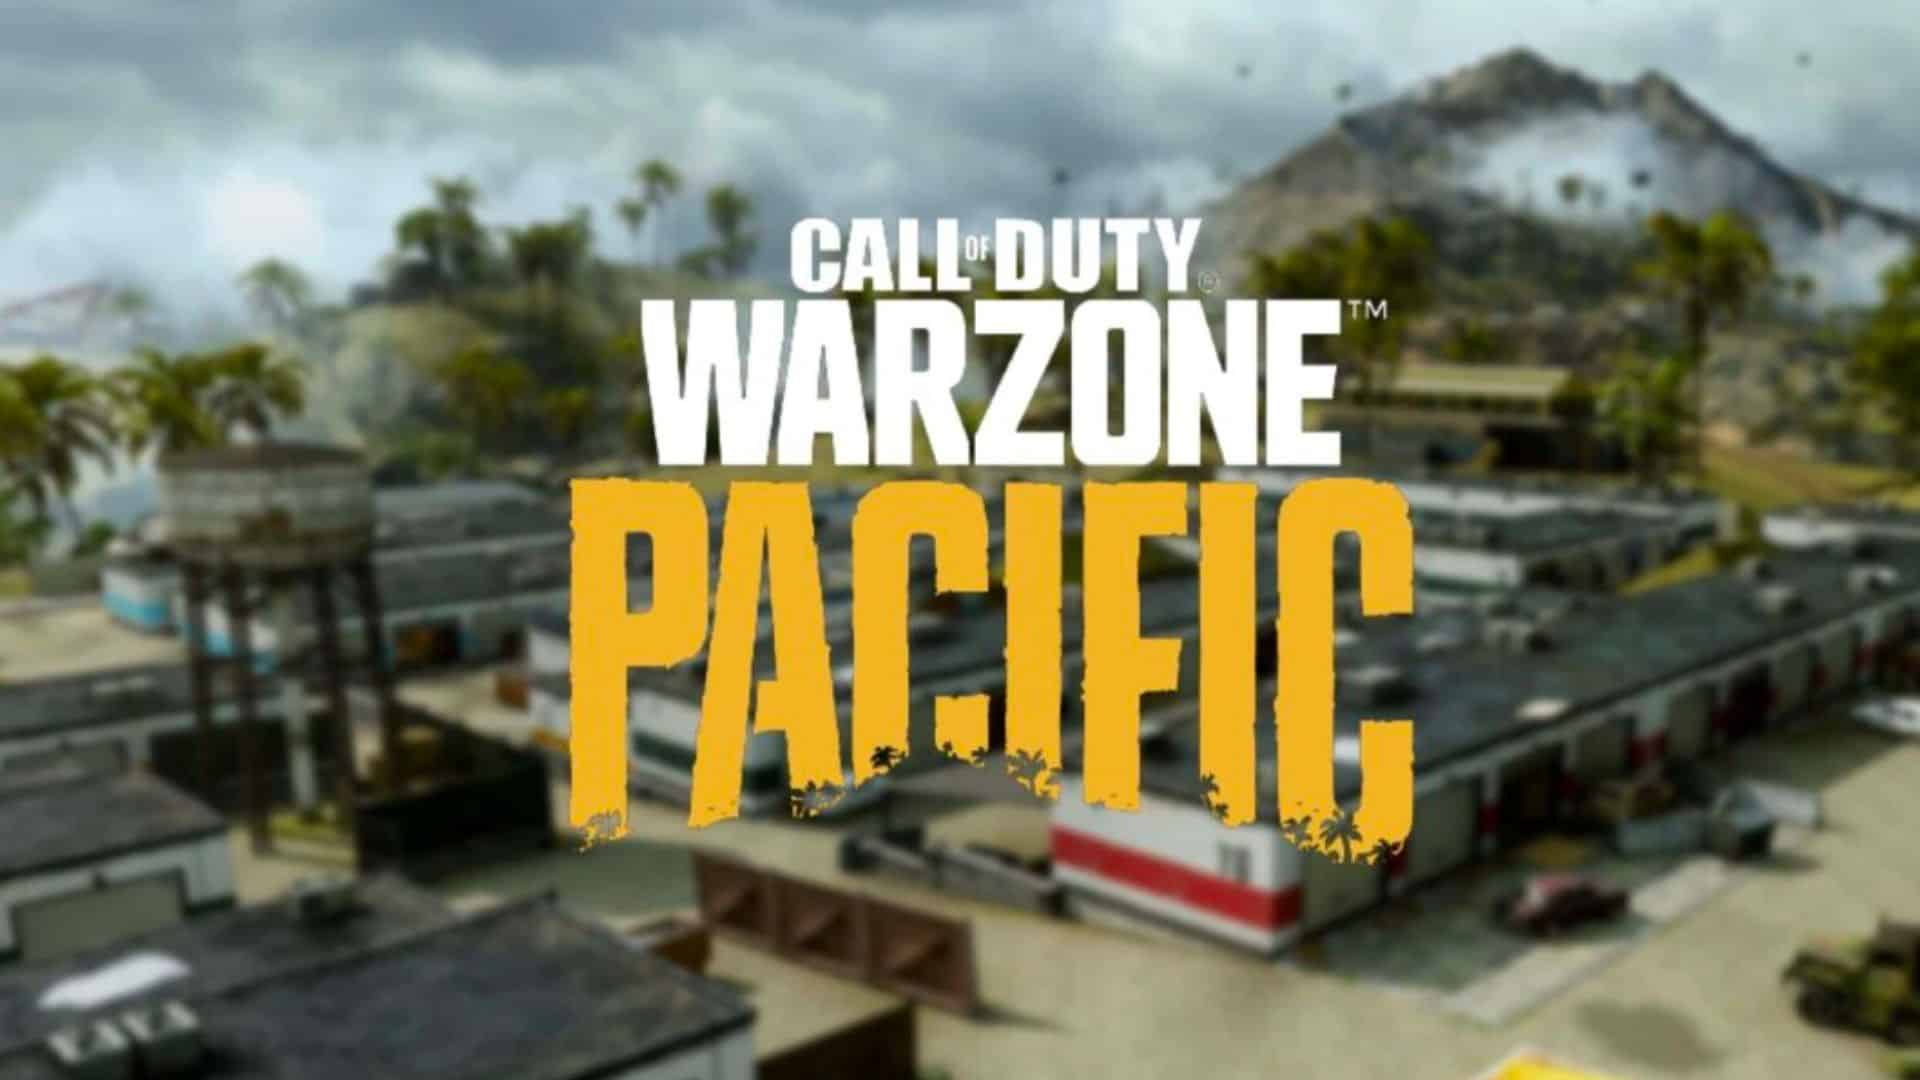 Storage Town in Caldera with Warzone Pacific logo